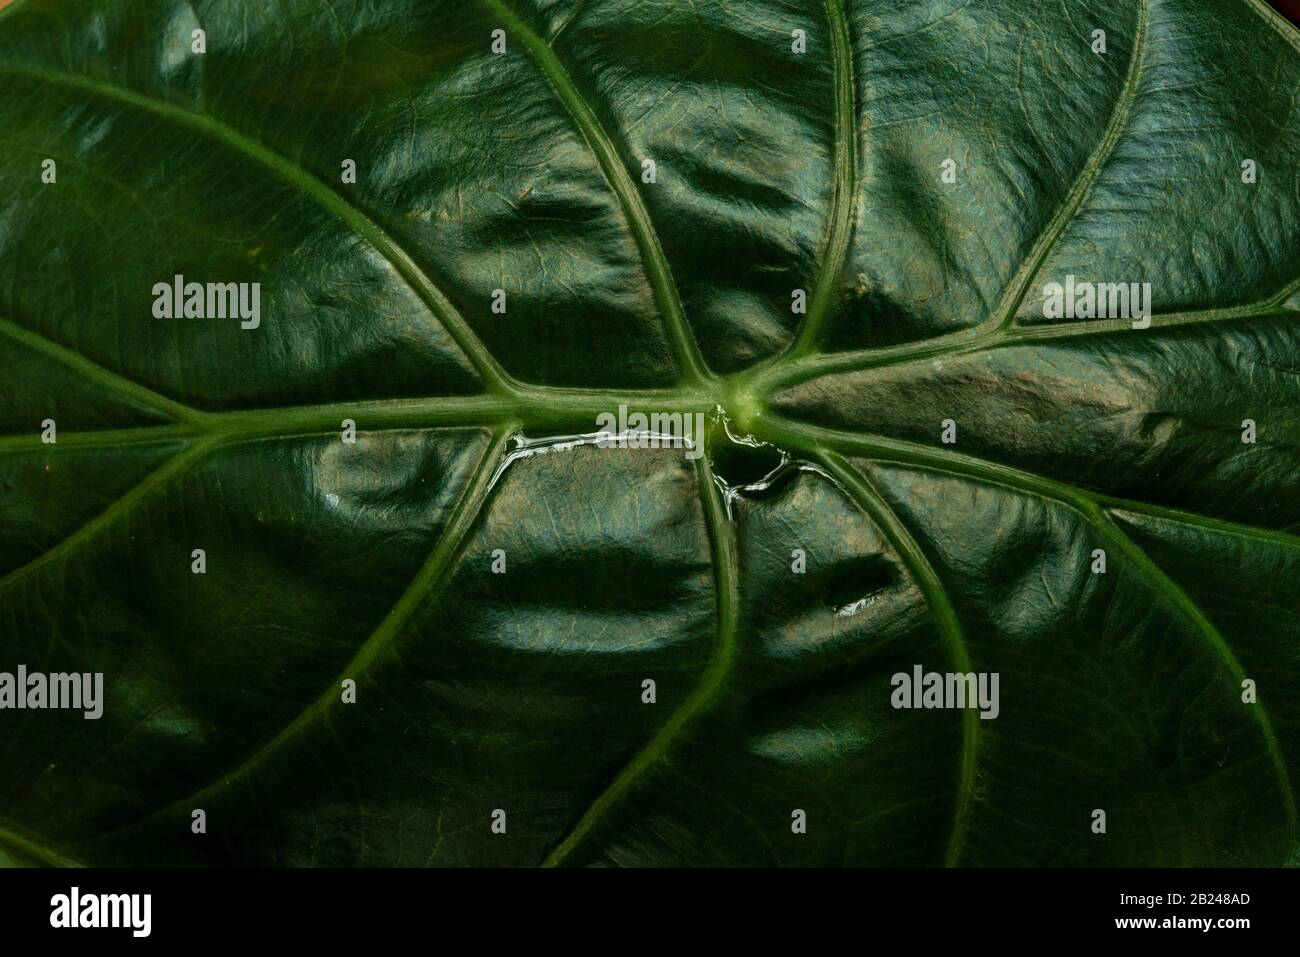 Detailed view, Green leaf with leaf veins, Botanical Garden, Dahlem, Berlin, Germany Stock Photo